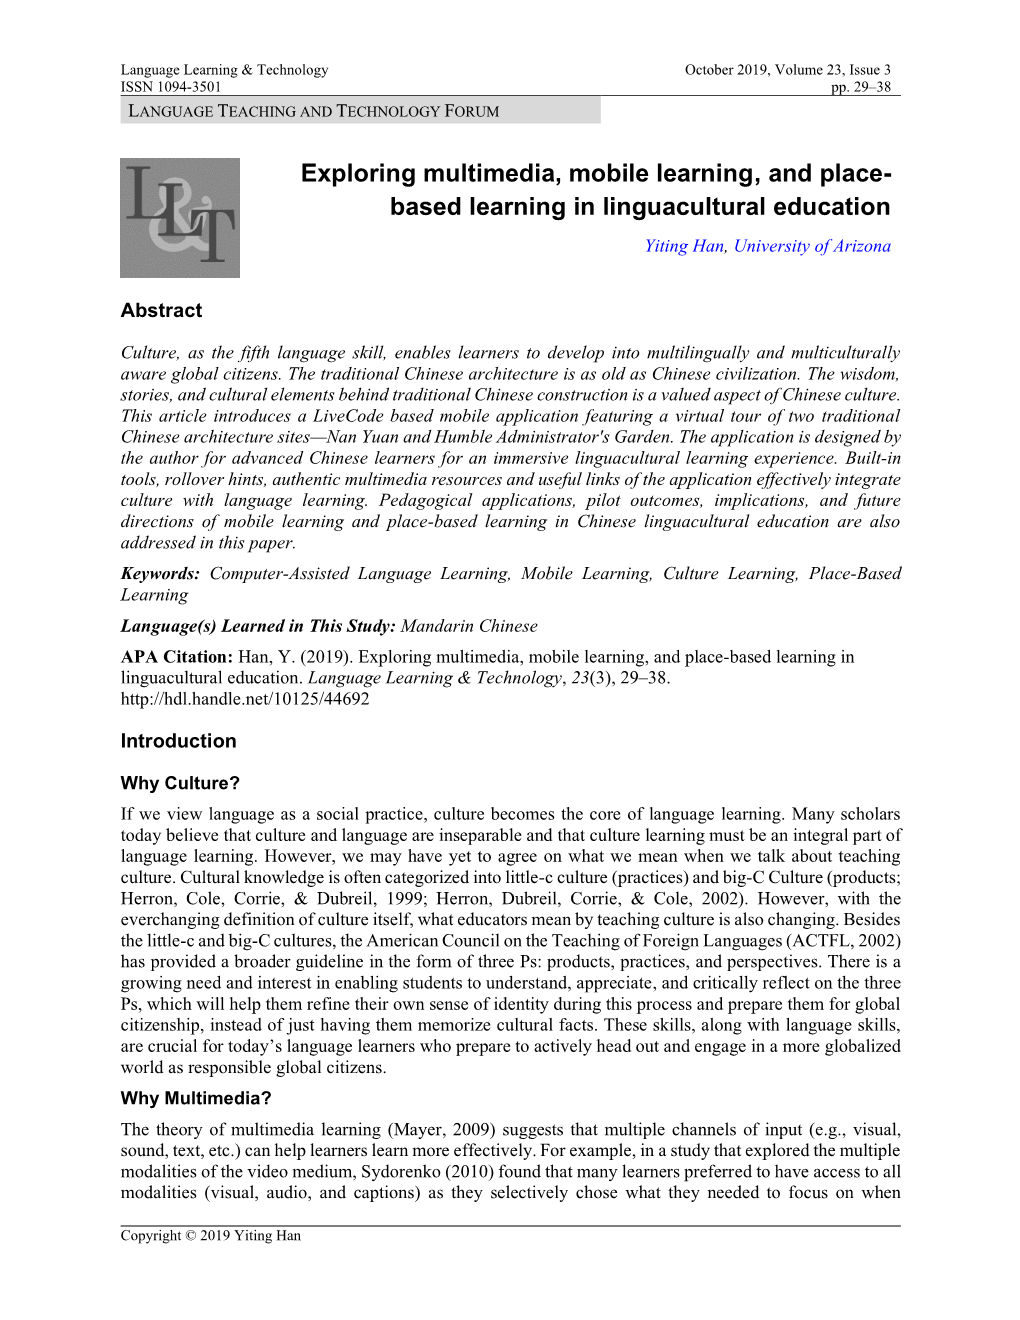 Exploring Multimedia, Mobile Learning, and Place-Based Learning in Linguacultural Education